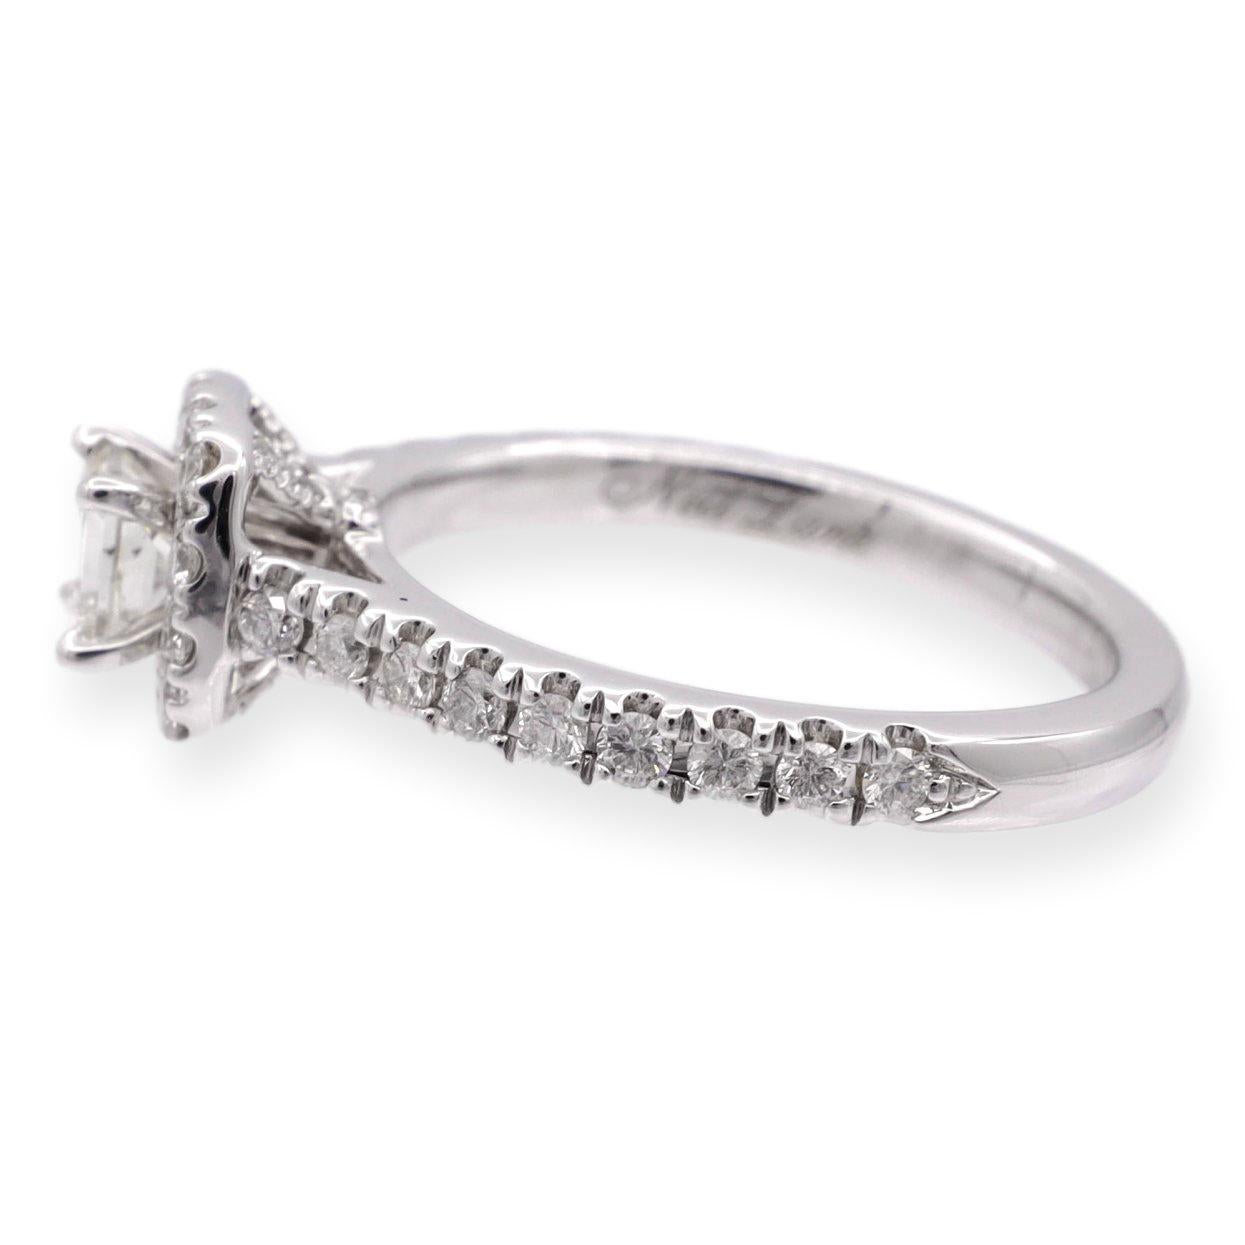 Diamond Engagement ring designed by Neil Lane finely crafted in 14 karat white gold featuring a princess cut diamond center weighing 0.26 carats approximately ranging I-J color, SI1-SI2 clarity adorned by 1 row of bead set diamonds creating a